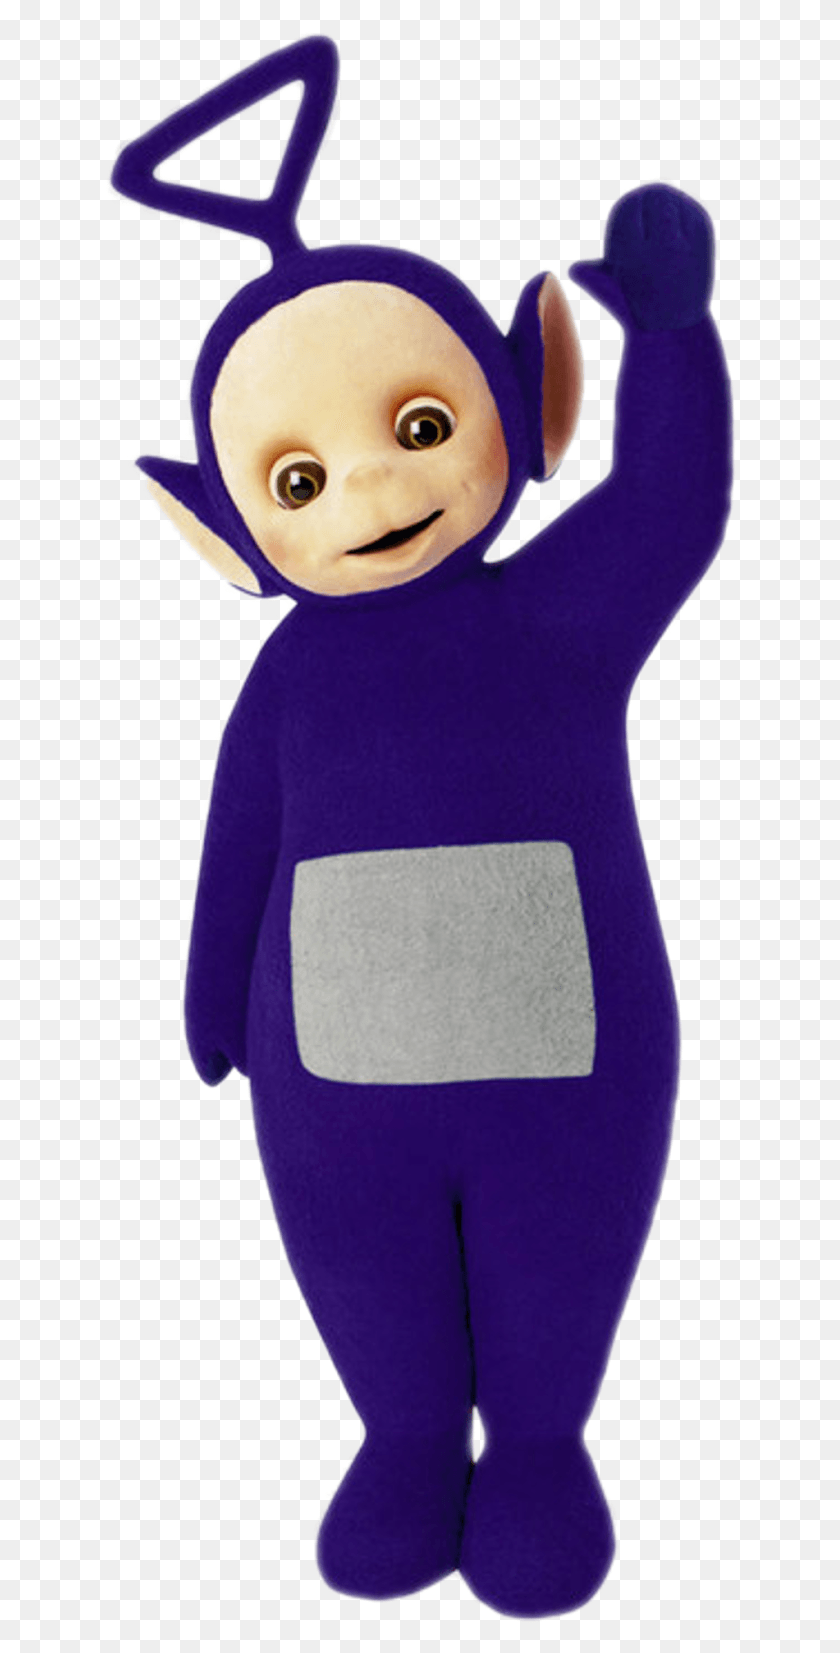 633x1593 Descargar Png / Teletubbies Teletubbies Tinky Winky, Ropa, Sudadera Hd Png